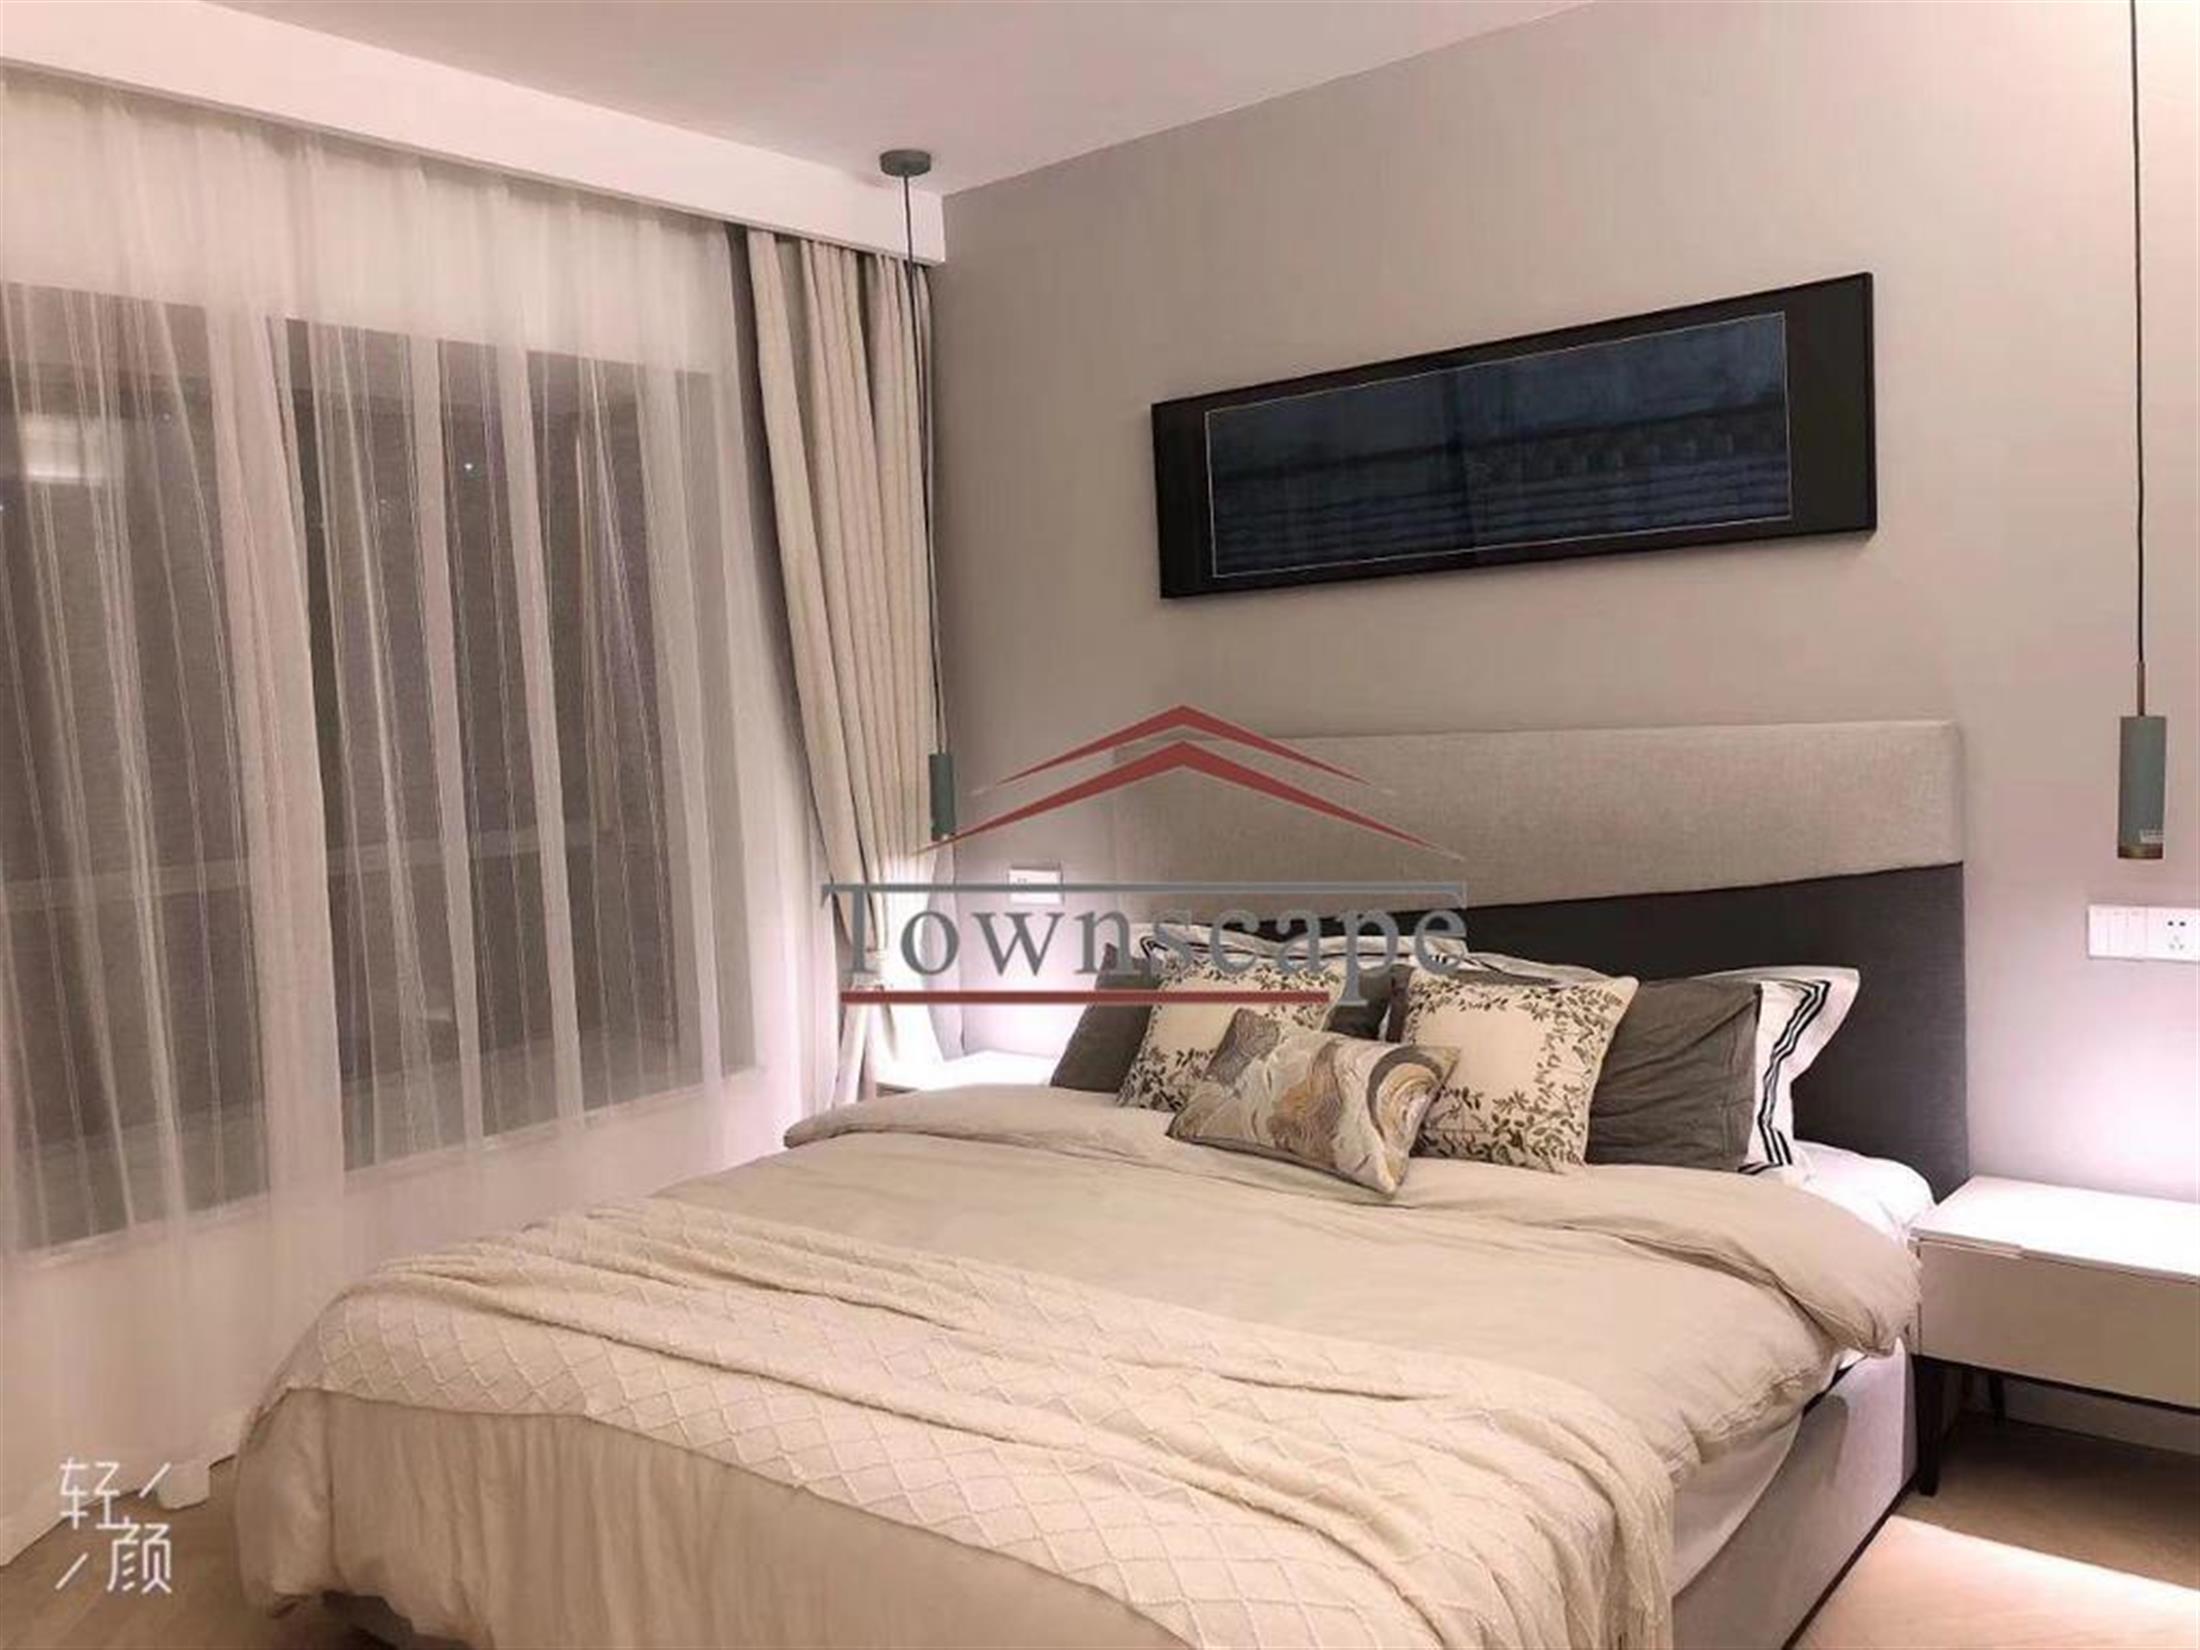 Comfy Bed New Gorgeous Spacious Bright Apartment for Rent in Quiet FFC Shanghai